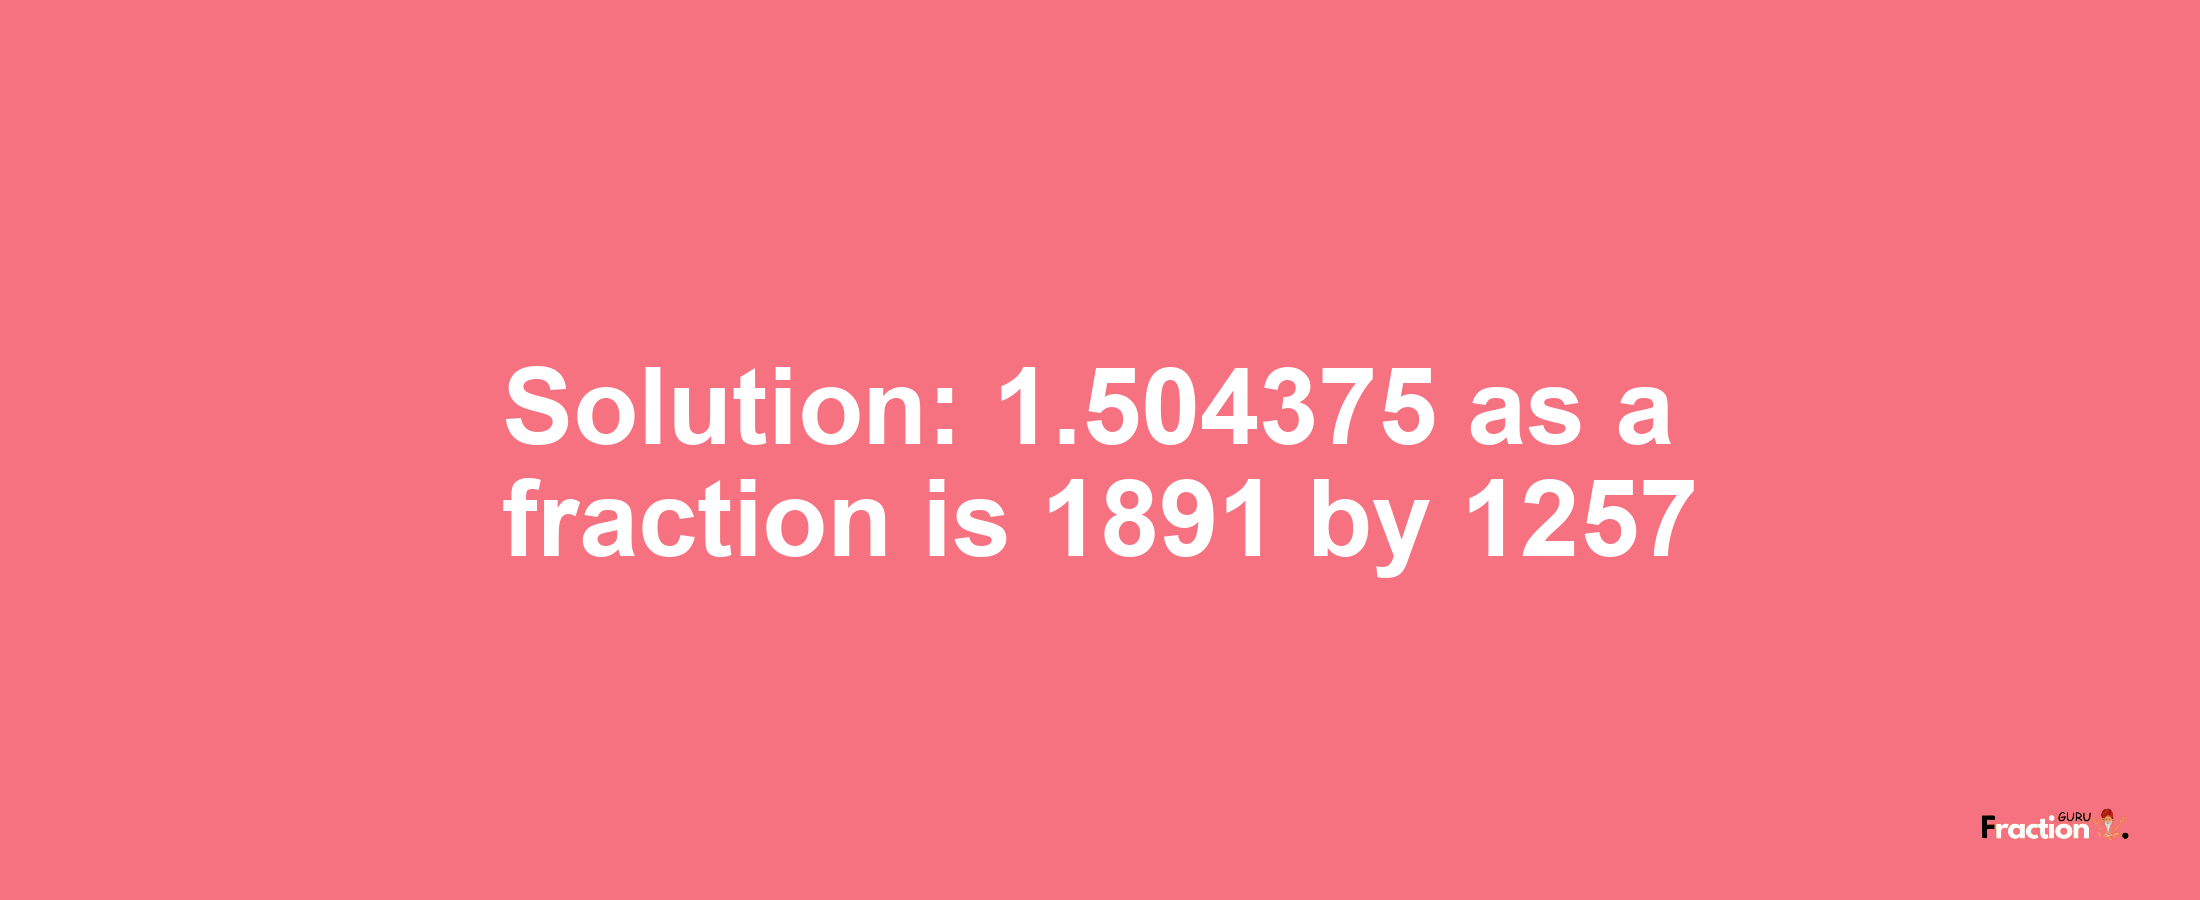 Solution:1.504375 as a fraction is 1891/1257